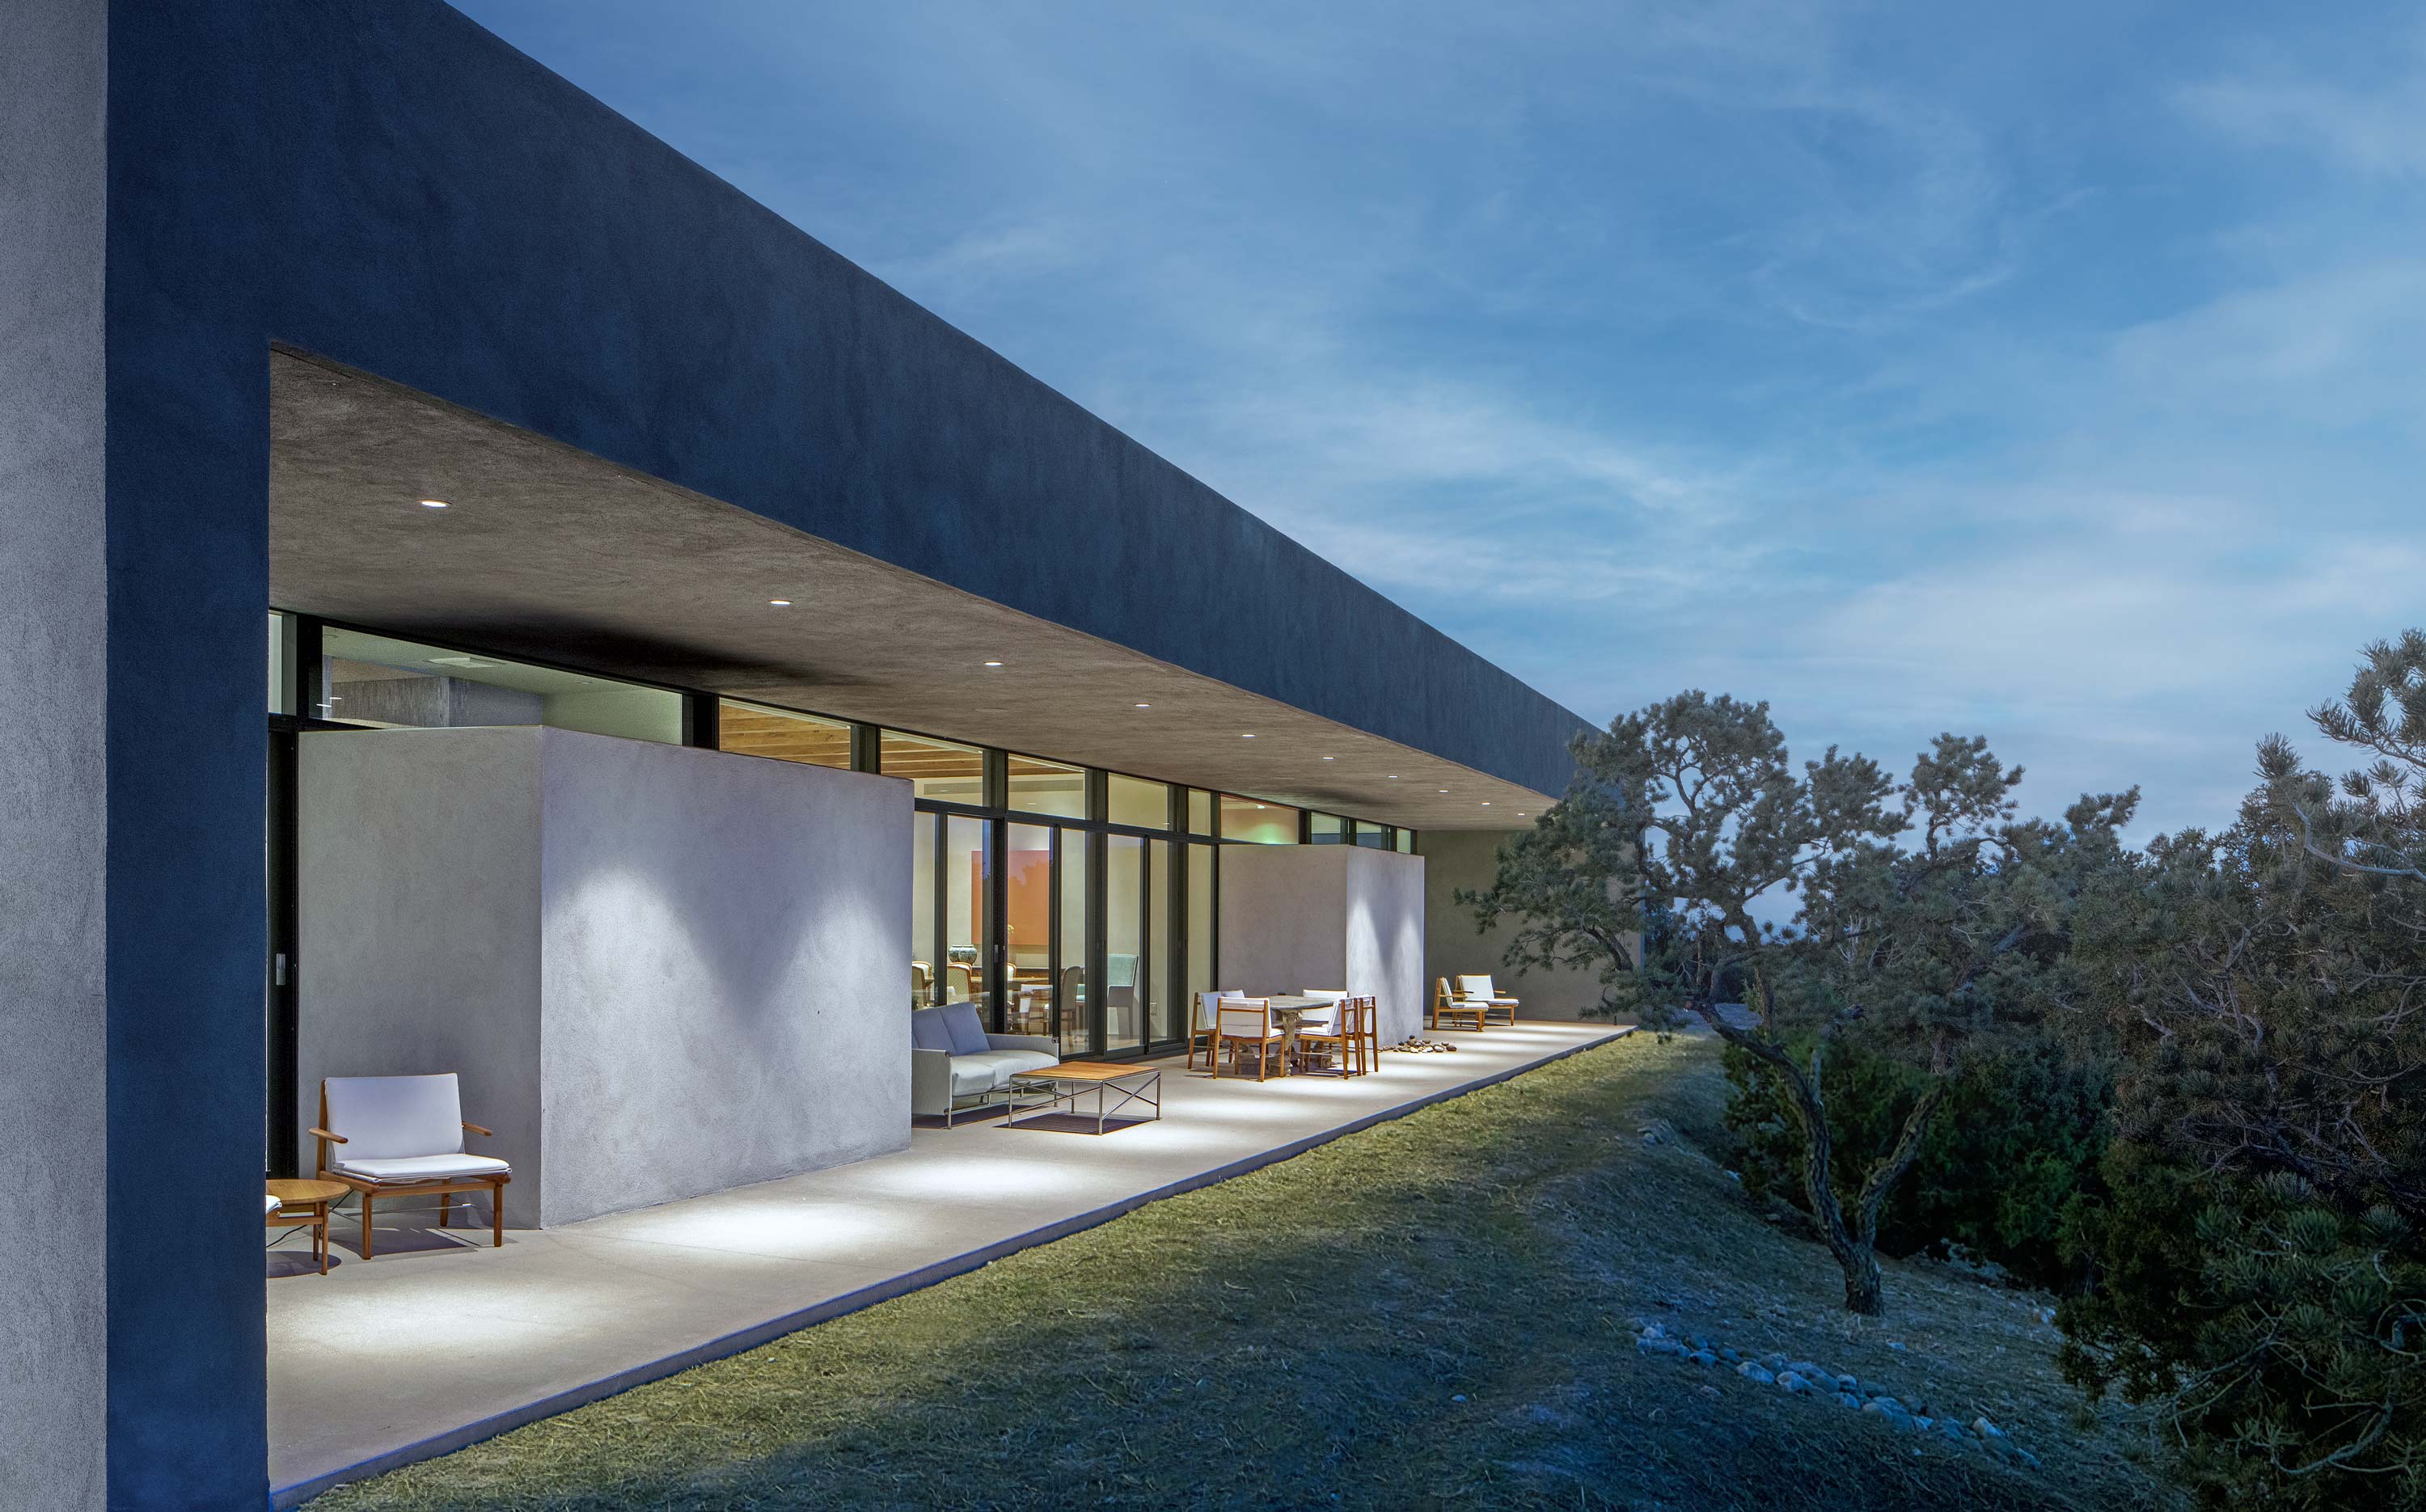 Exterior photo of the Sangre de Cristo House by Specht Novak Architects. Shot at dusk by Casey Dunn, featuring a covered deck on the perimeter of the house that faces its surrounding greenery.